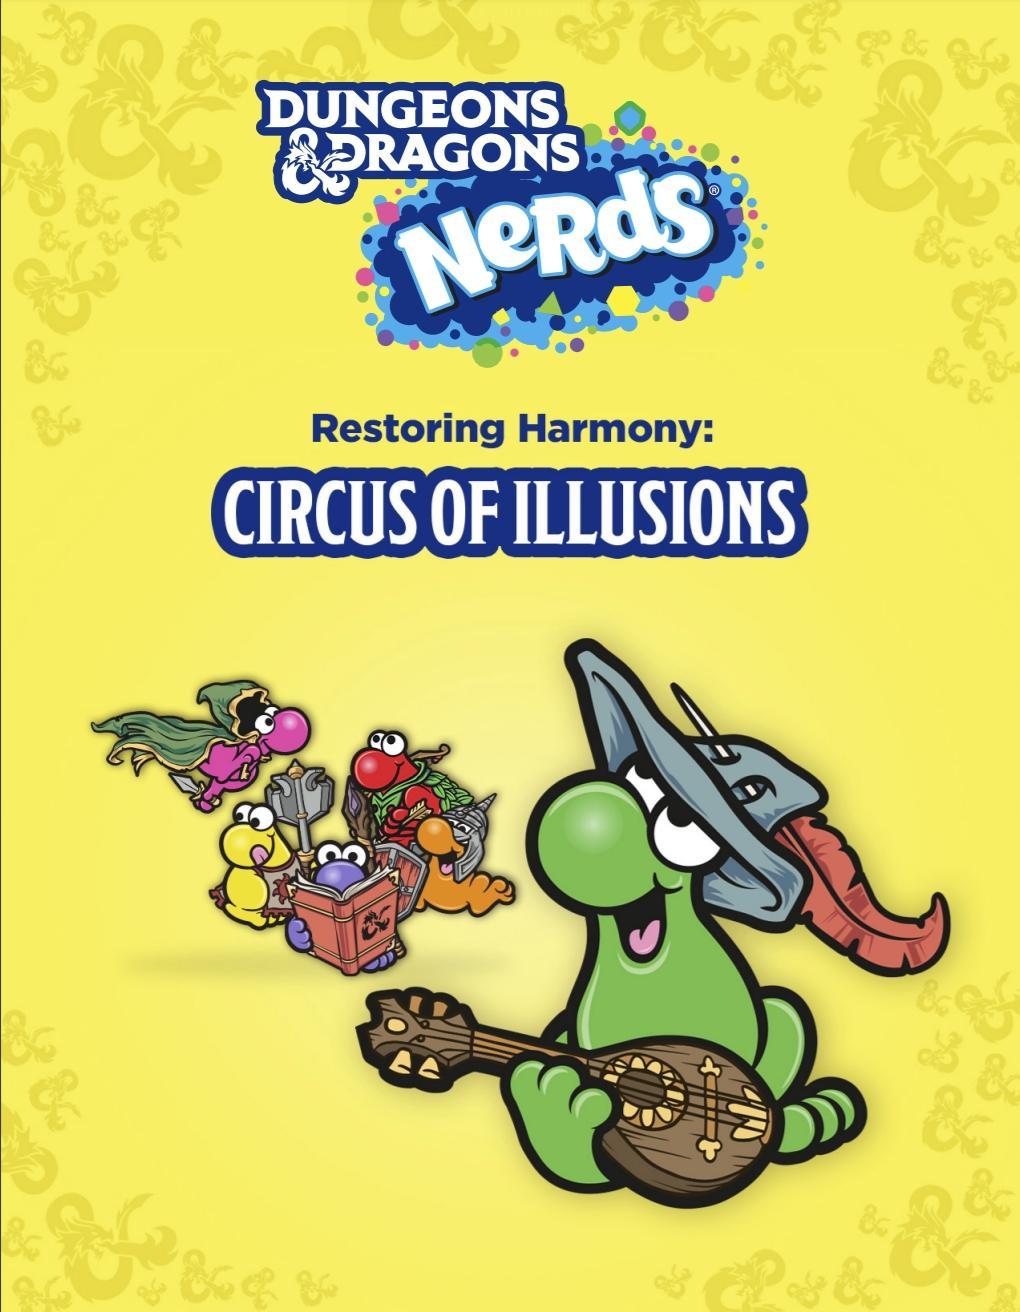 NERDS Dungeons & Dragons Adventure 4 – Circus of Illusions